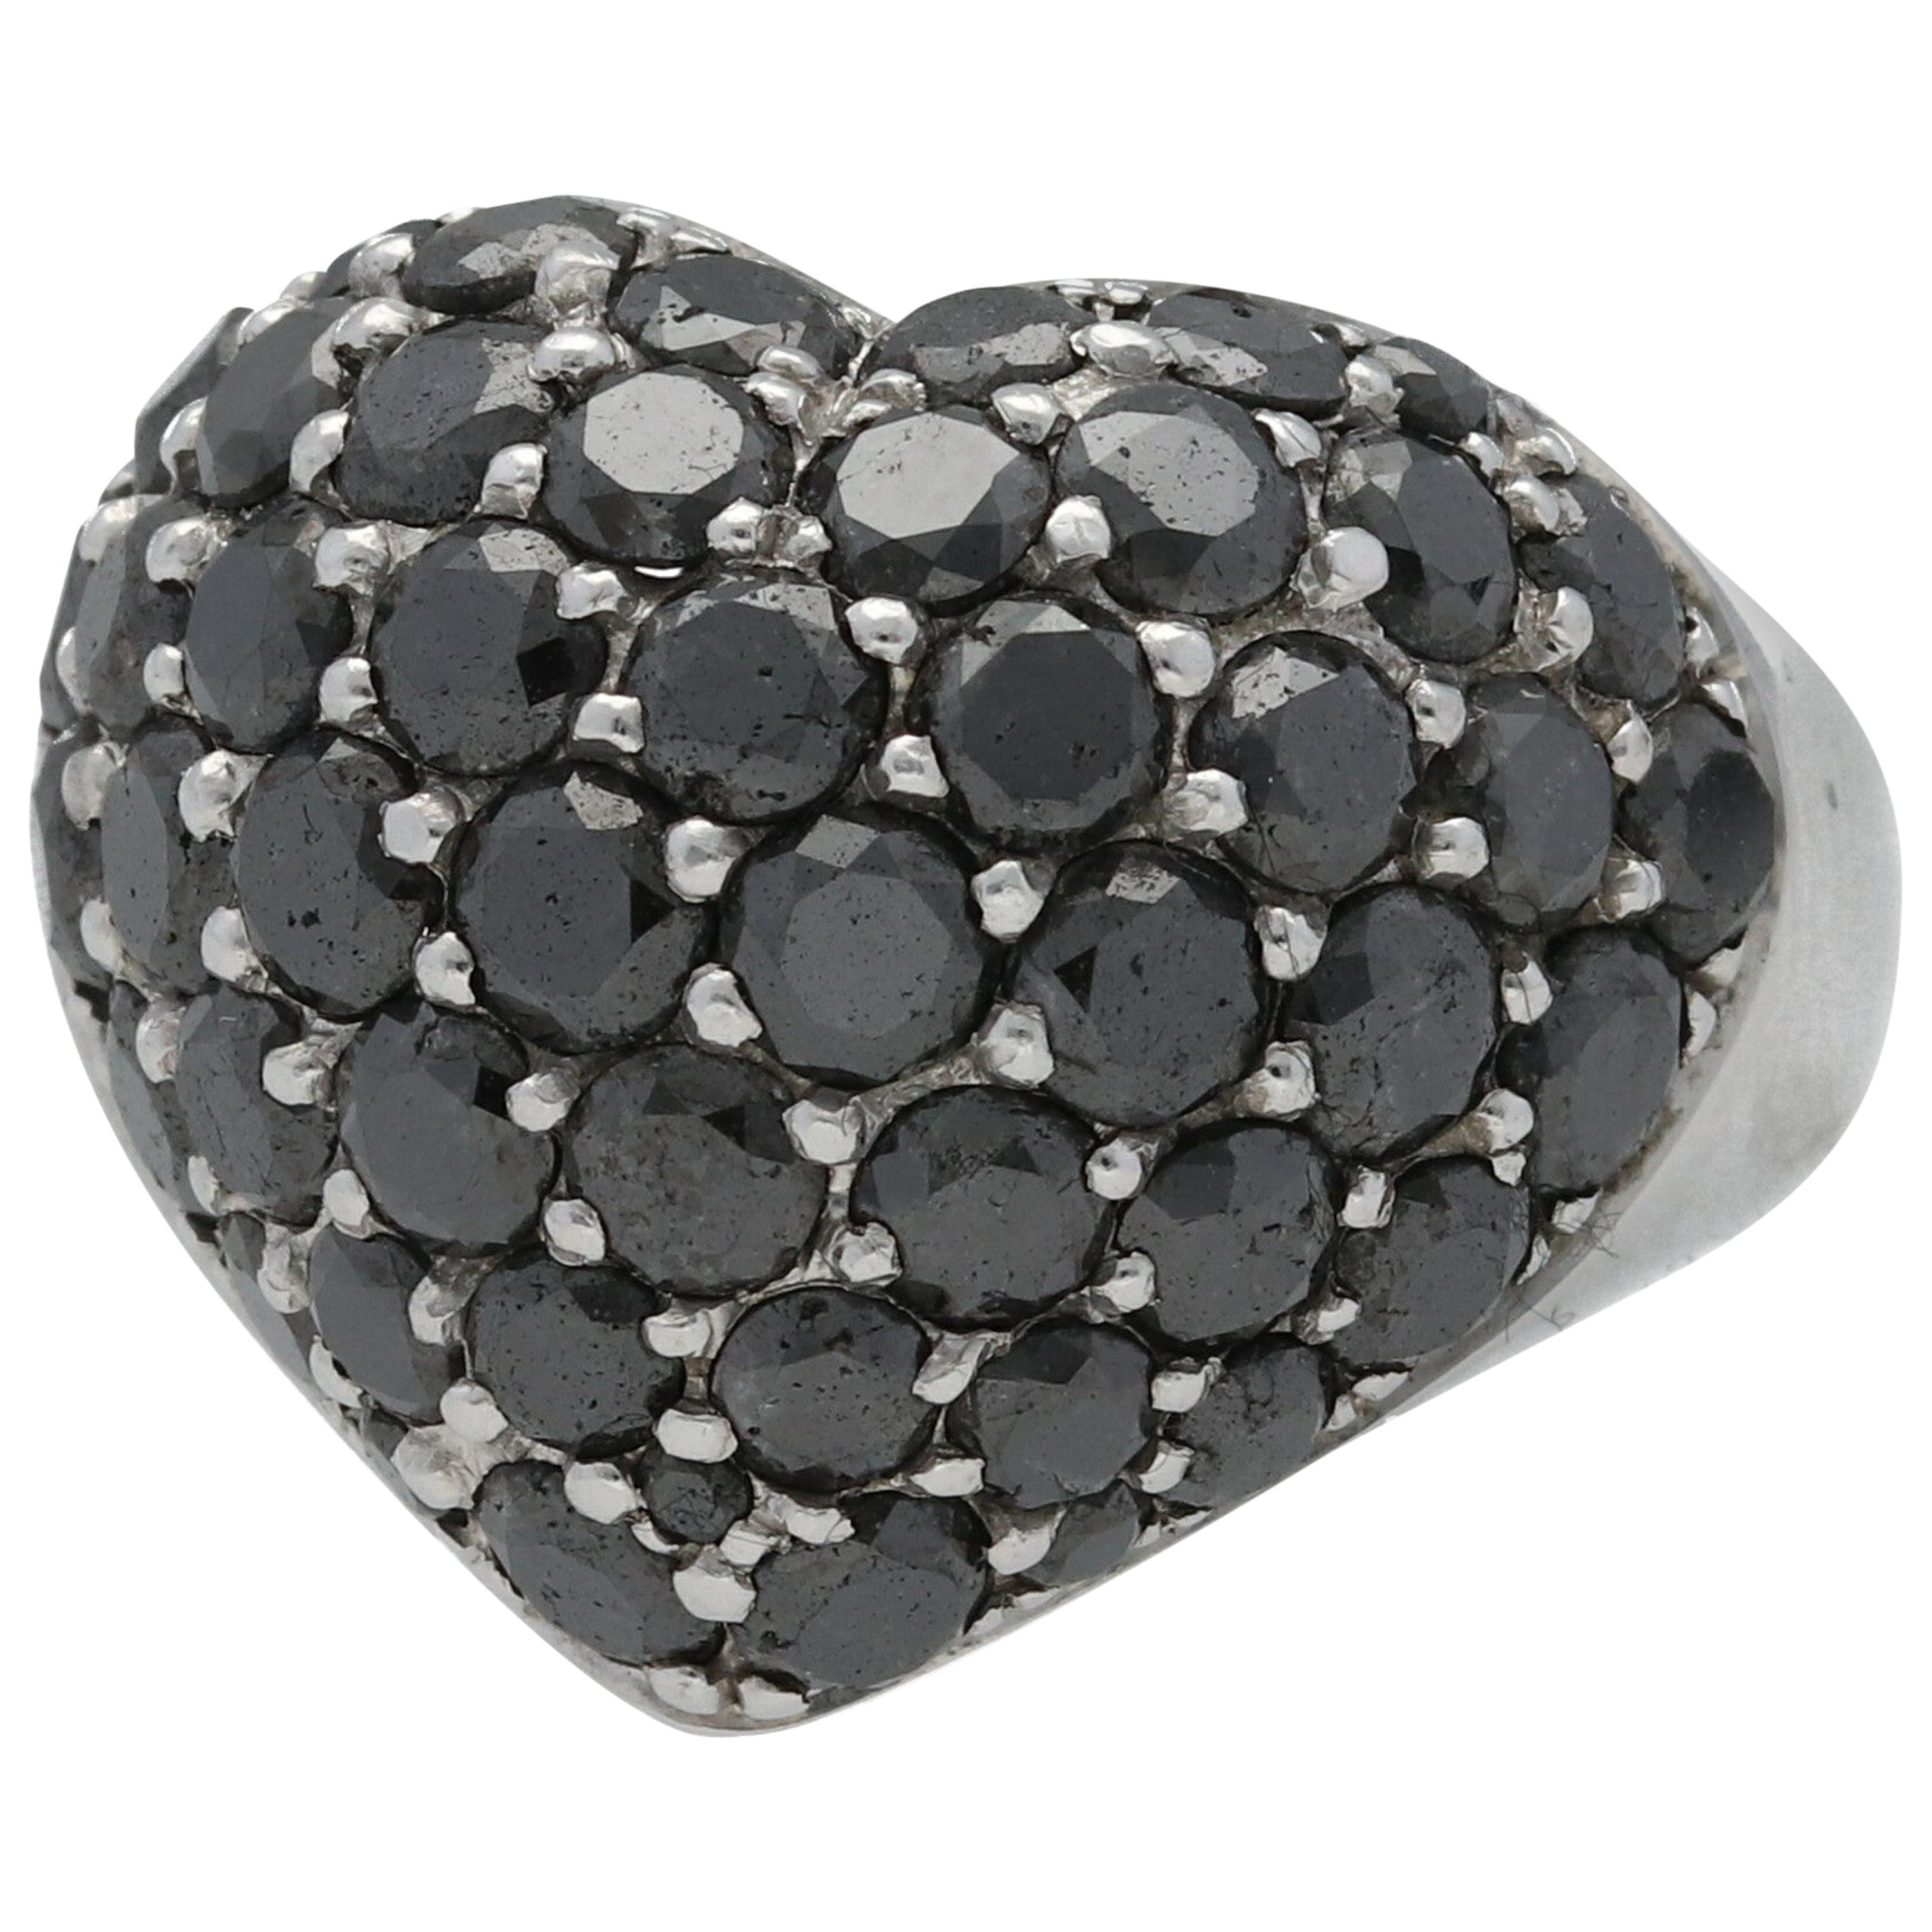 A Chopard cocktail ring, set with 49 circular-cut black diamonds, weighing 4.98 carats, mounted in a heart shaped 18K white gold ring, weighing 11.6 grams, with the word LOVE inscription in the back.

Size US  6.5 - 53.1 mm

Components:
Total  black